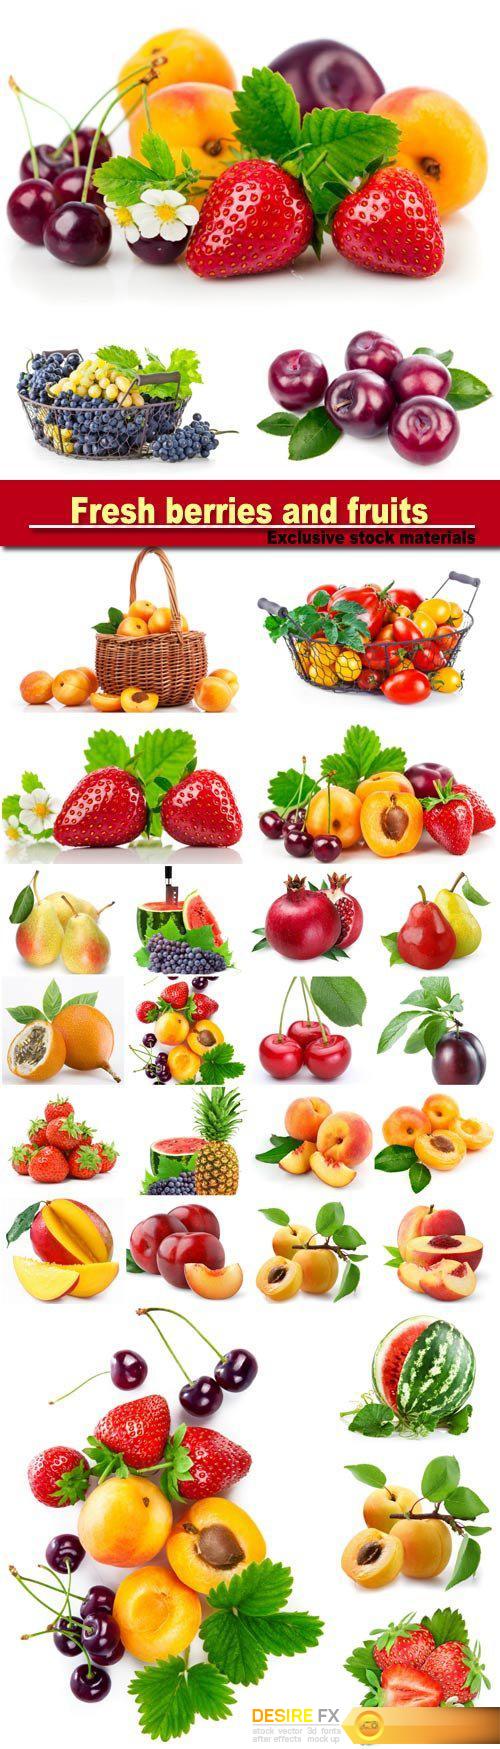 Fresh berries and fruits in still life with green leaves strawberry, apricot, cherry, plum isolated on white background